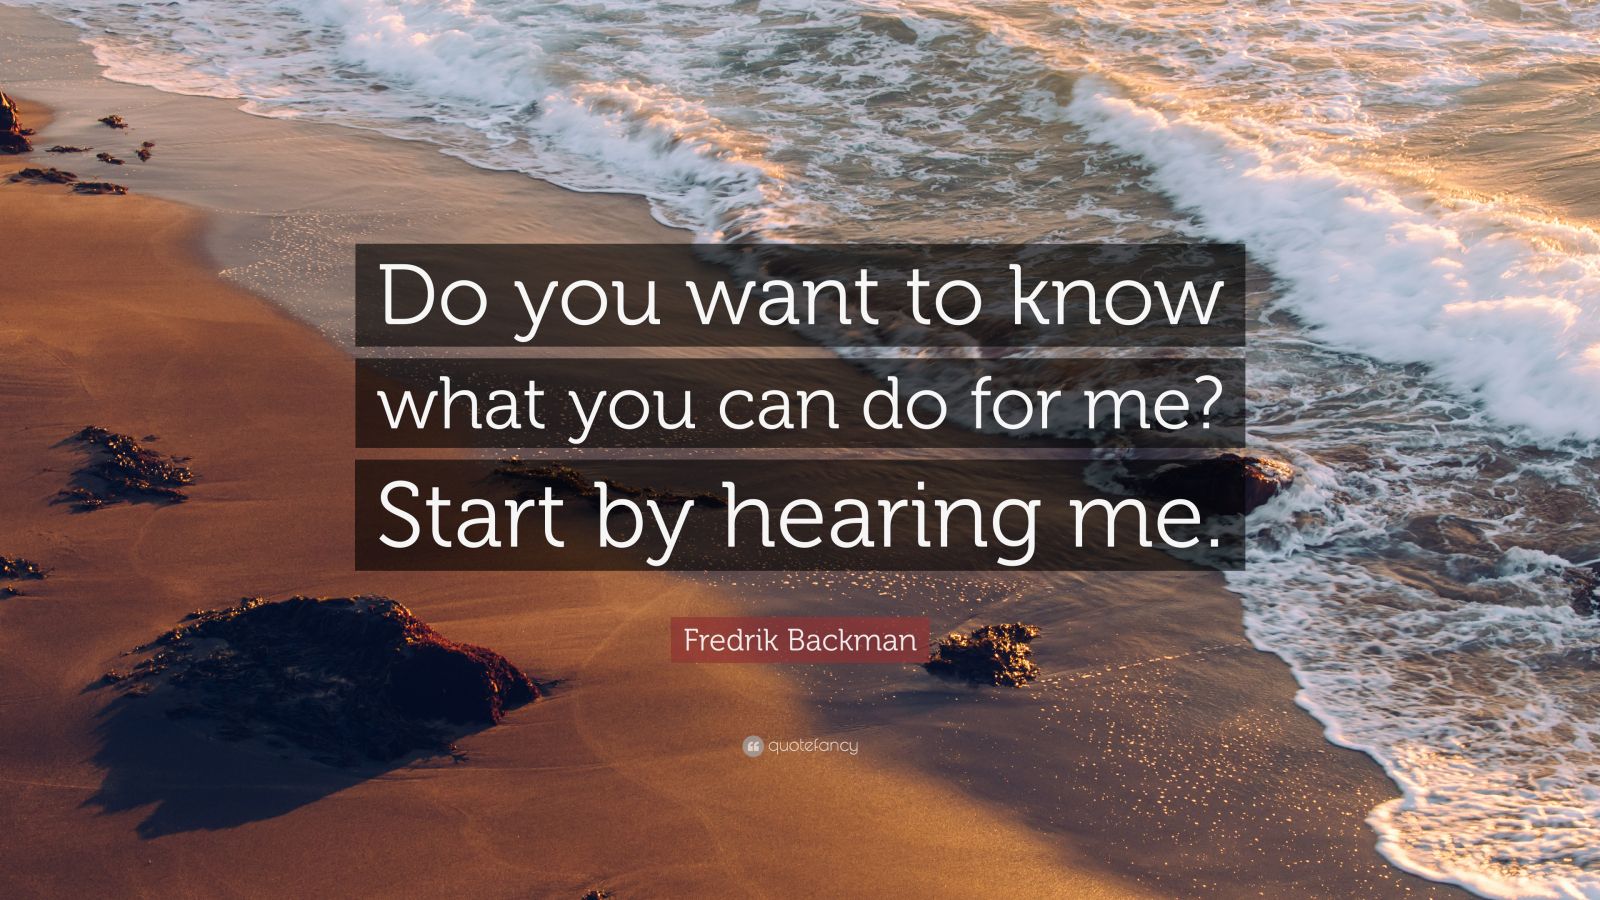 Fredrik Backman Quote: “Do you want to know what you can do for me ...